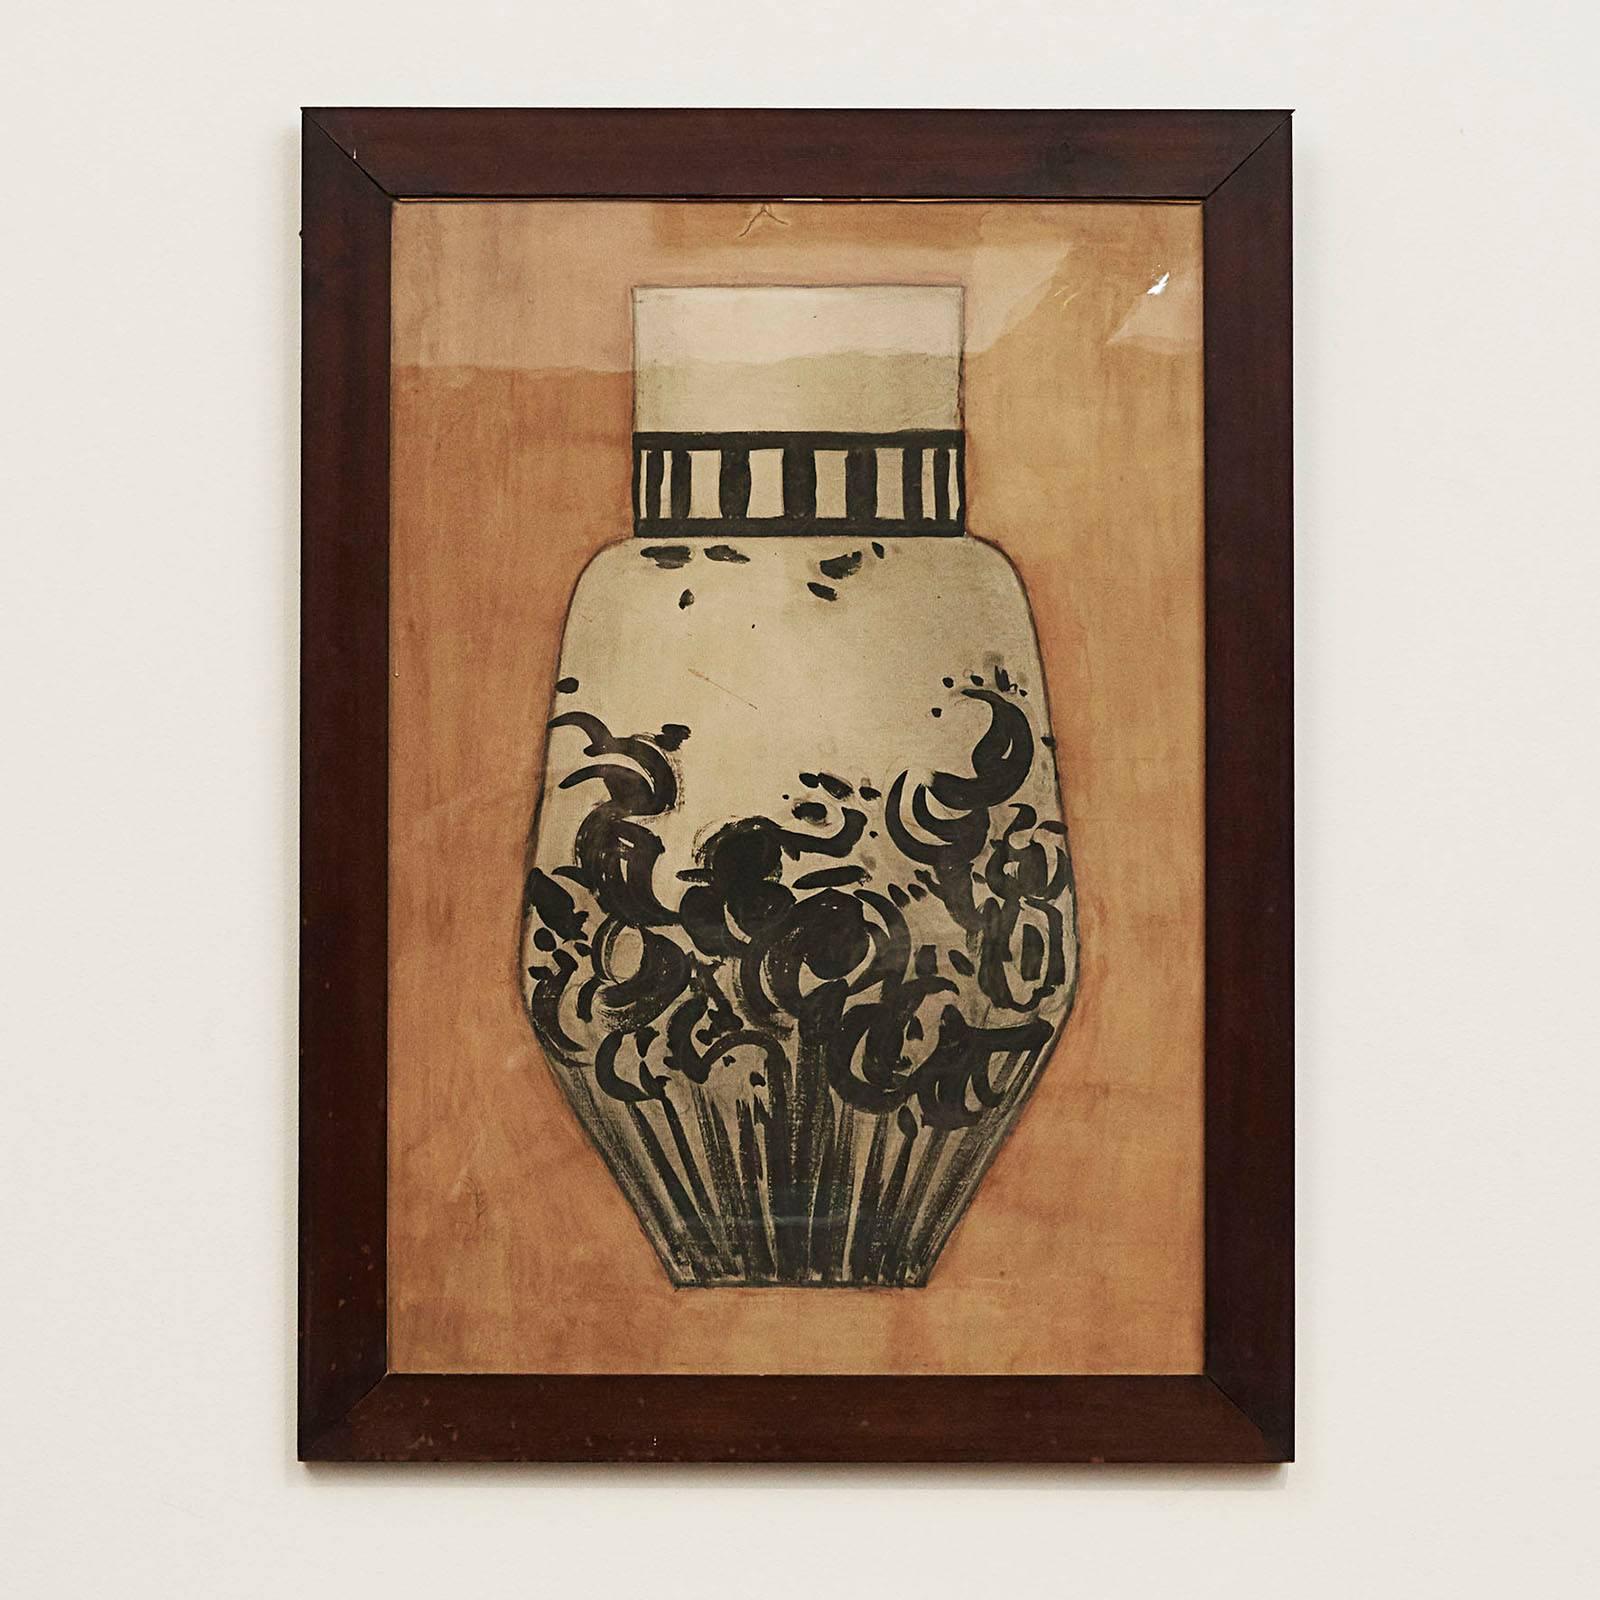 Thorvald Bindesbøll, Danish 1864-1908

Vase - A study for a ceramic piece. Watercolor on paper, signed lower left Feb 1894. 
Inventory stamps on verso. Framed in a simple wood frame.